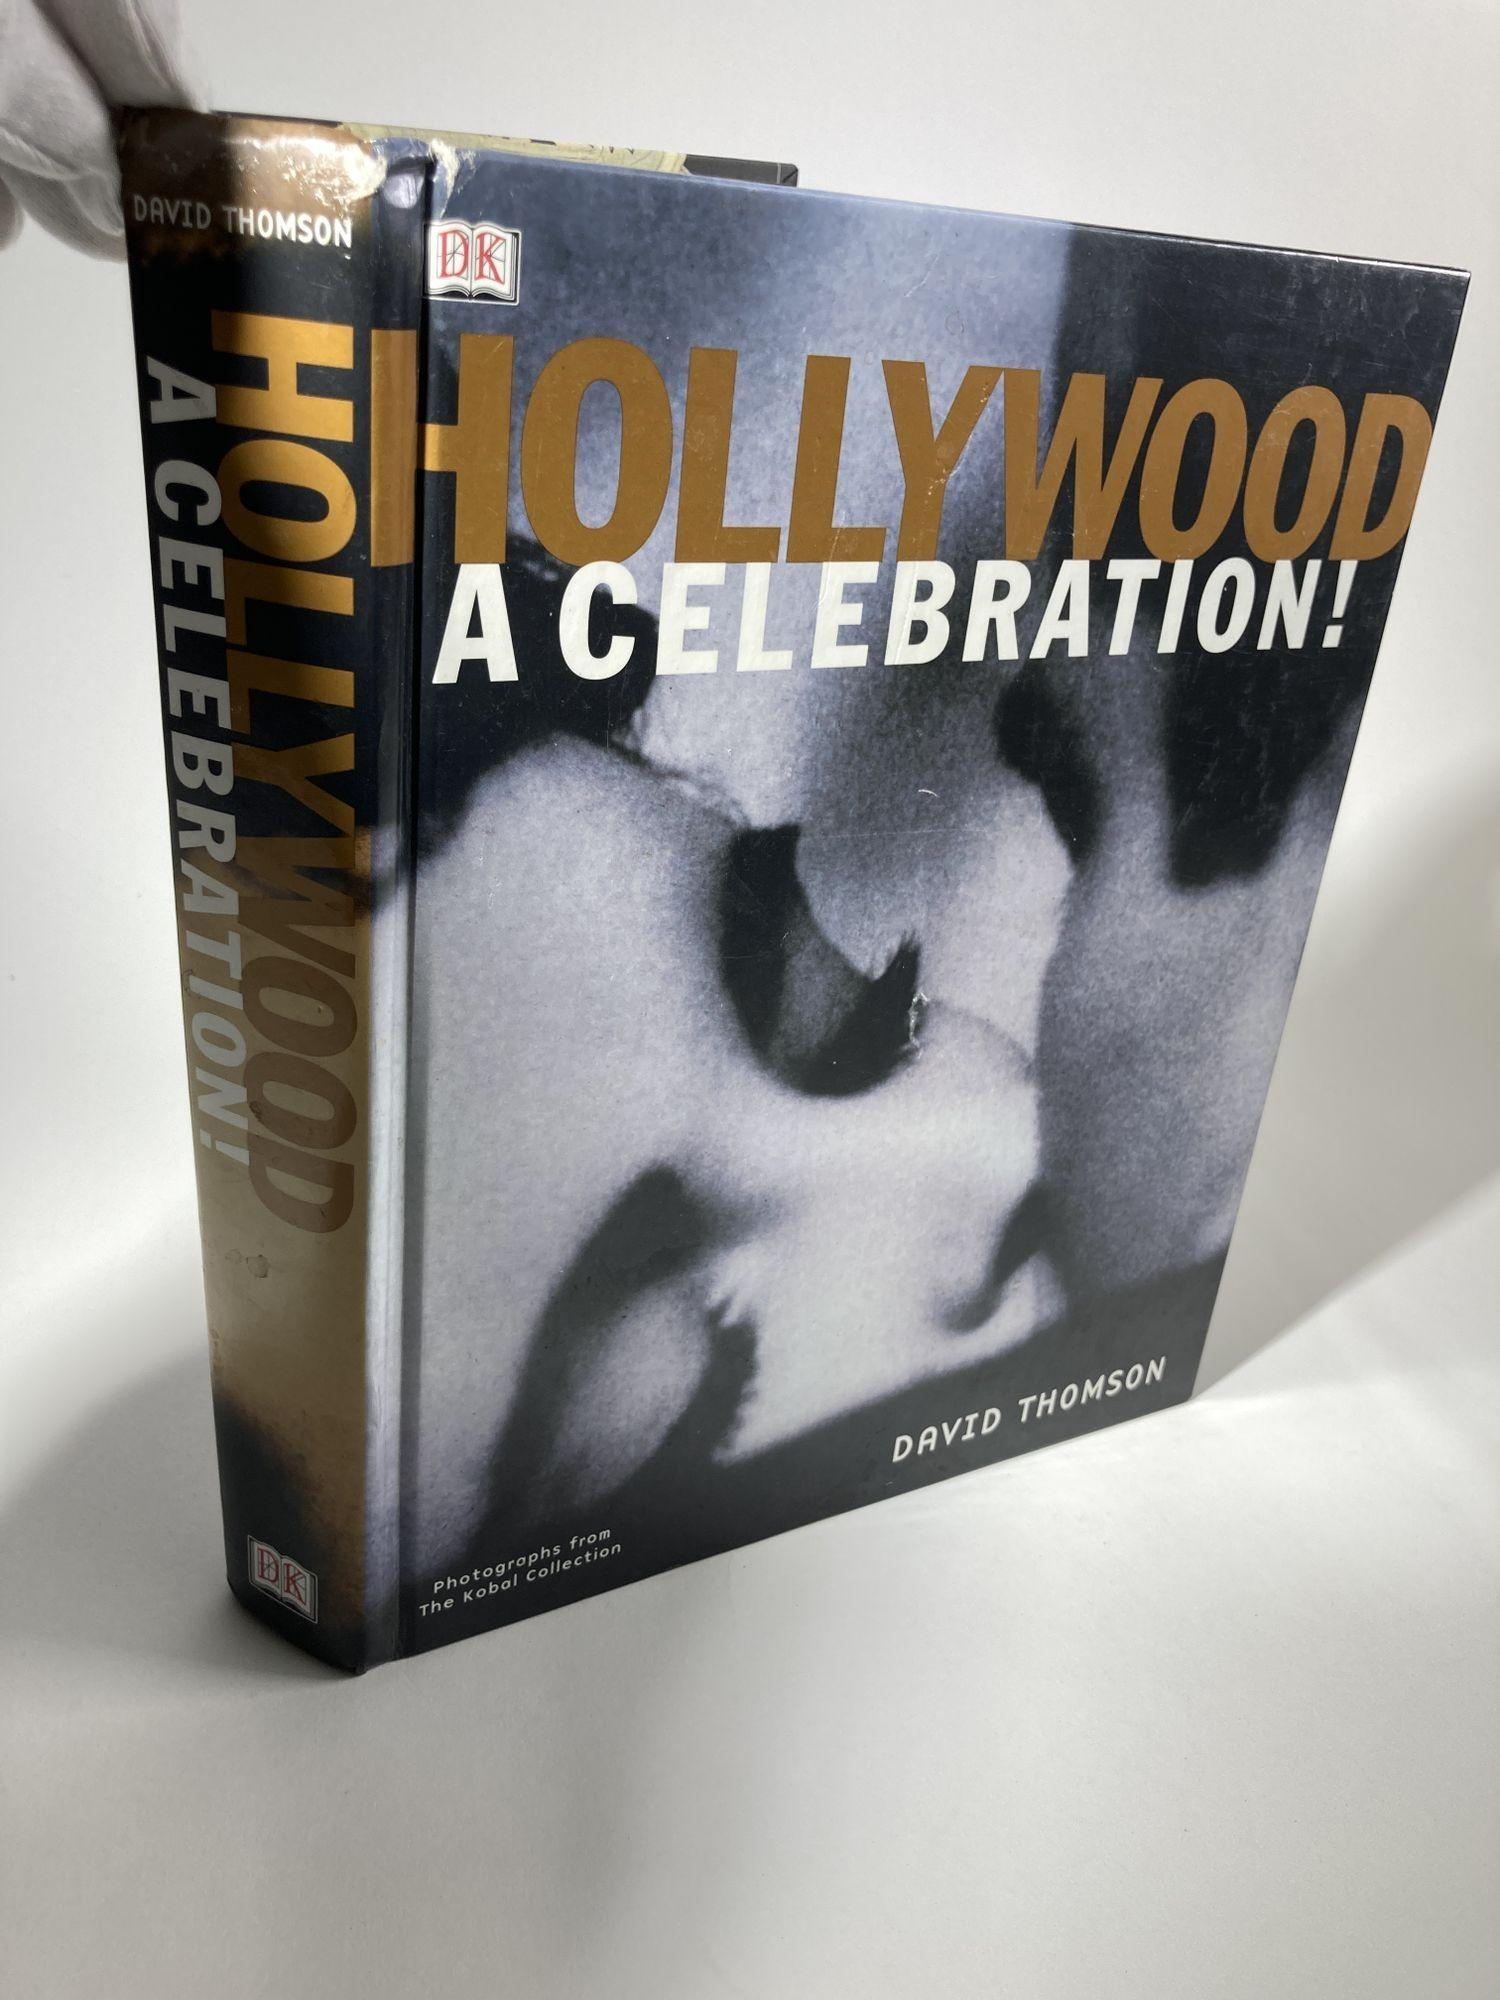 Hollywood: A Celebration by David Thomson DK Pub., 2001 - Performing Arts - 640 pages.
From the birth of the film industry in the dusty village of Hollywood 1905, to the computer-generated special effects extravaganzas of today; from the days when